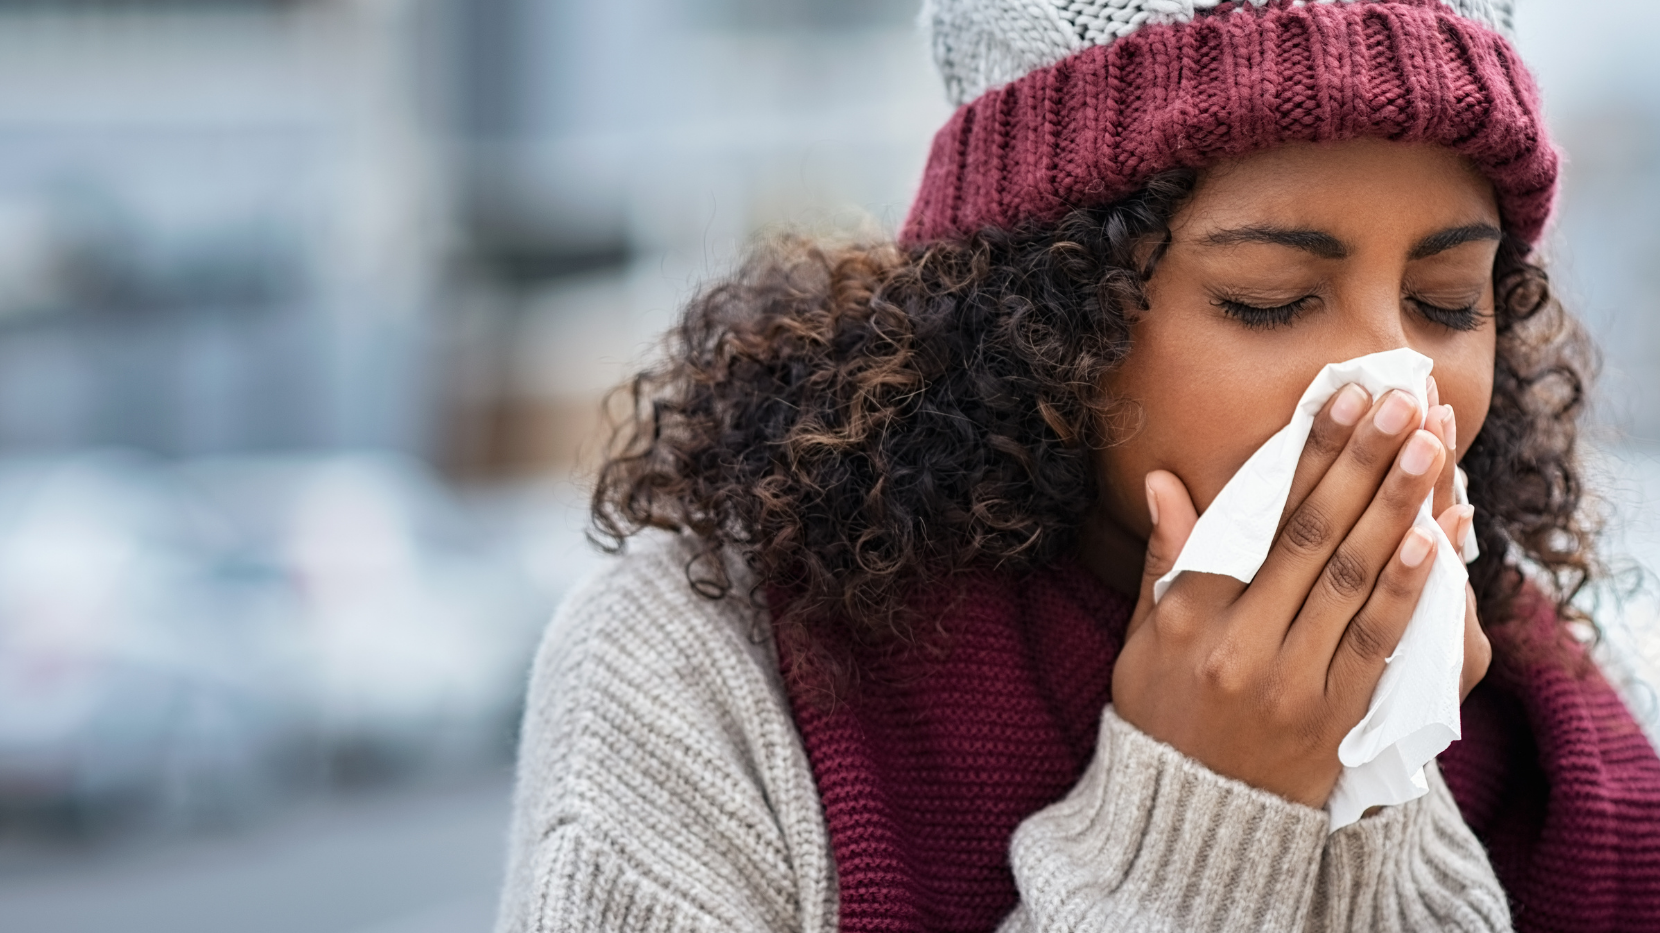 The Flu, COVID, and Winter: How to Stay Healthy this Season